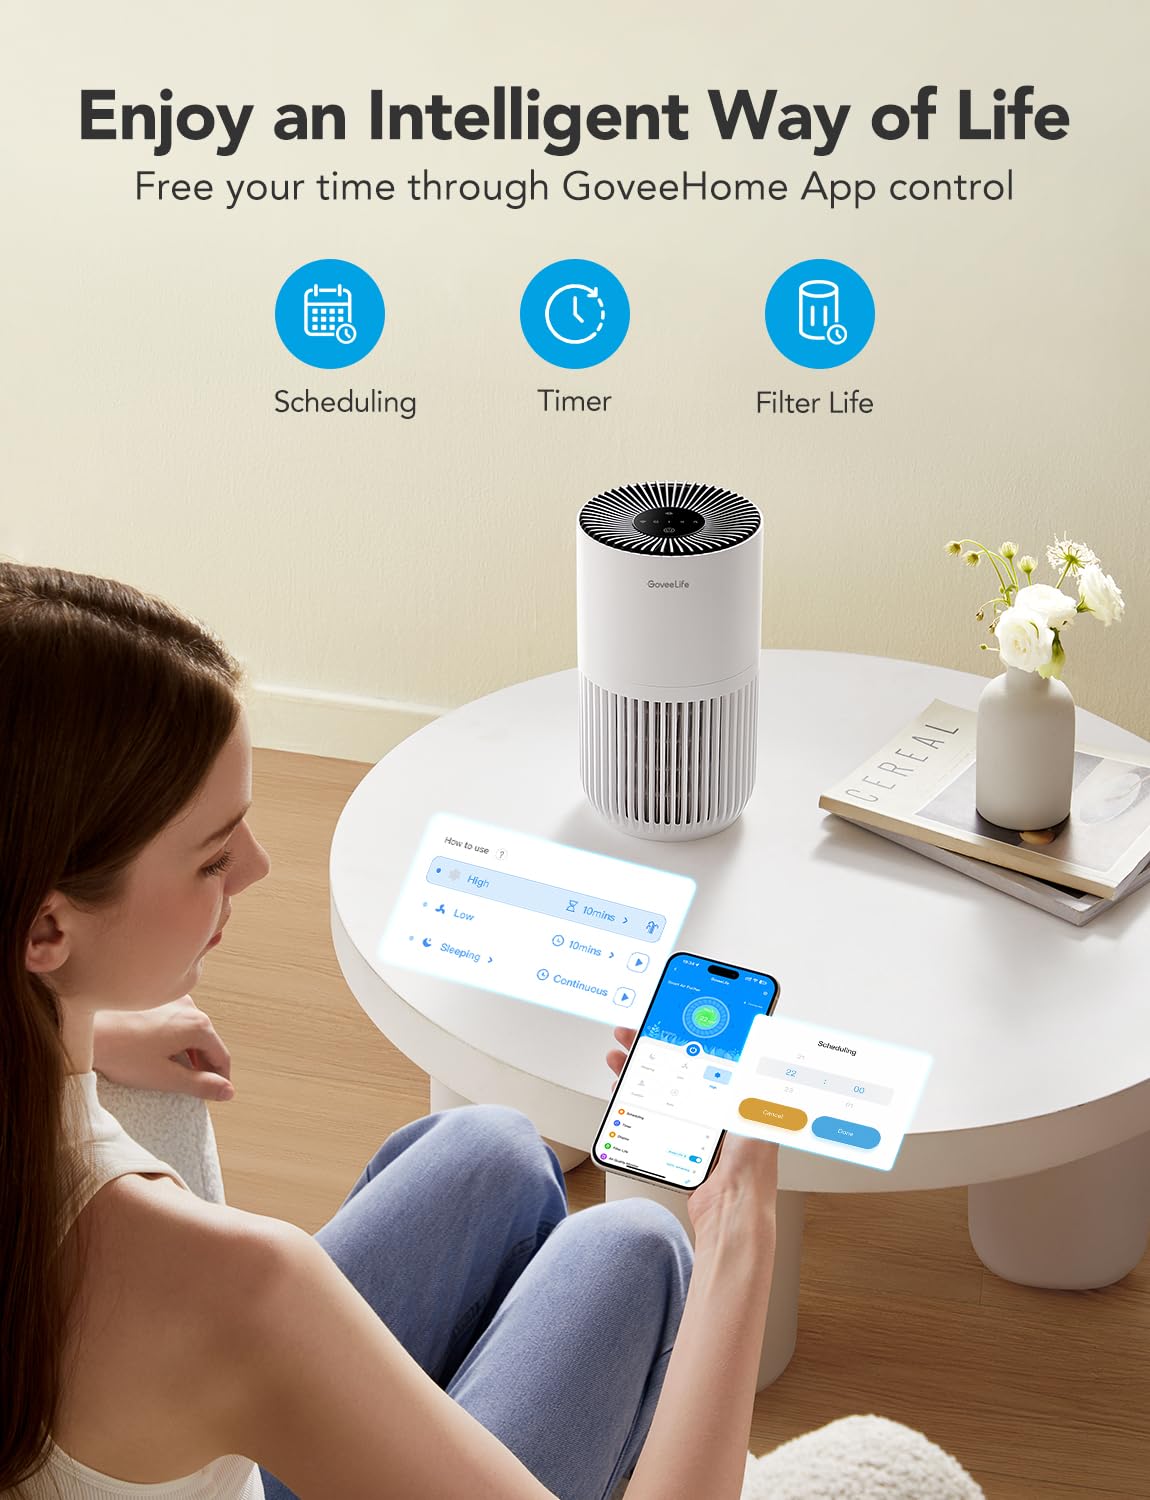 GoveeLife Mini Air Purifier for Bedroom, HEPA Smart Filter Air Purifier with App Alexa Control for Pet Hair, Odors, Pollen, Smoke, Portable Air Cleaner with 3 Speeds, 2 Modes, Timer, Aroma for Home